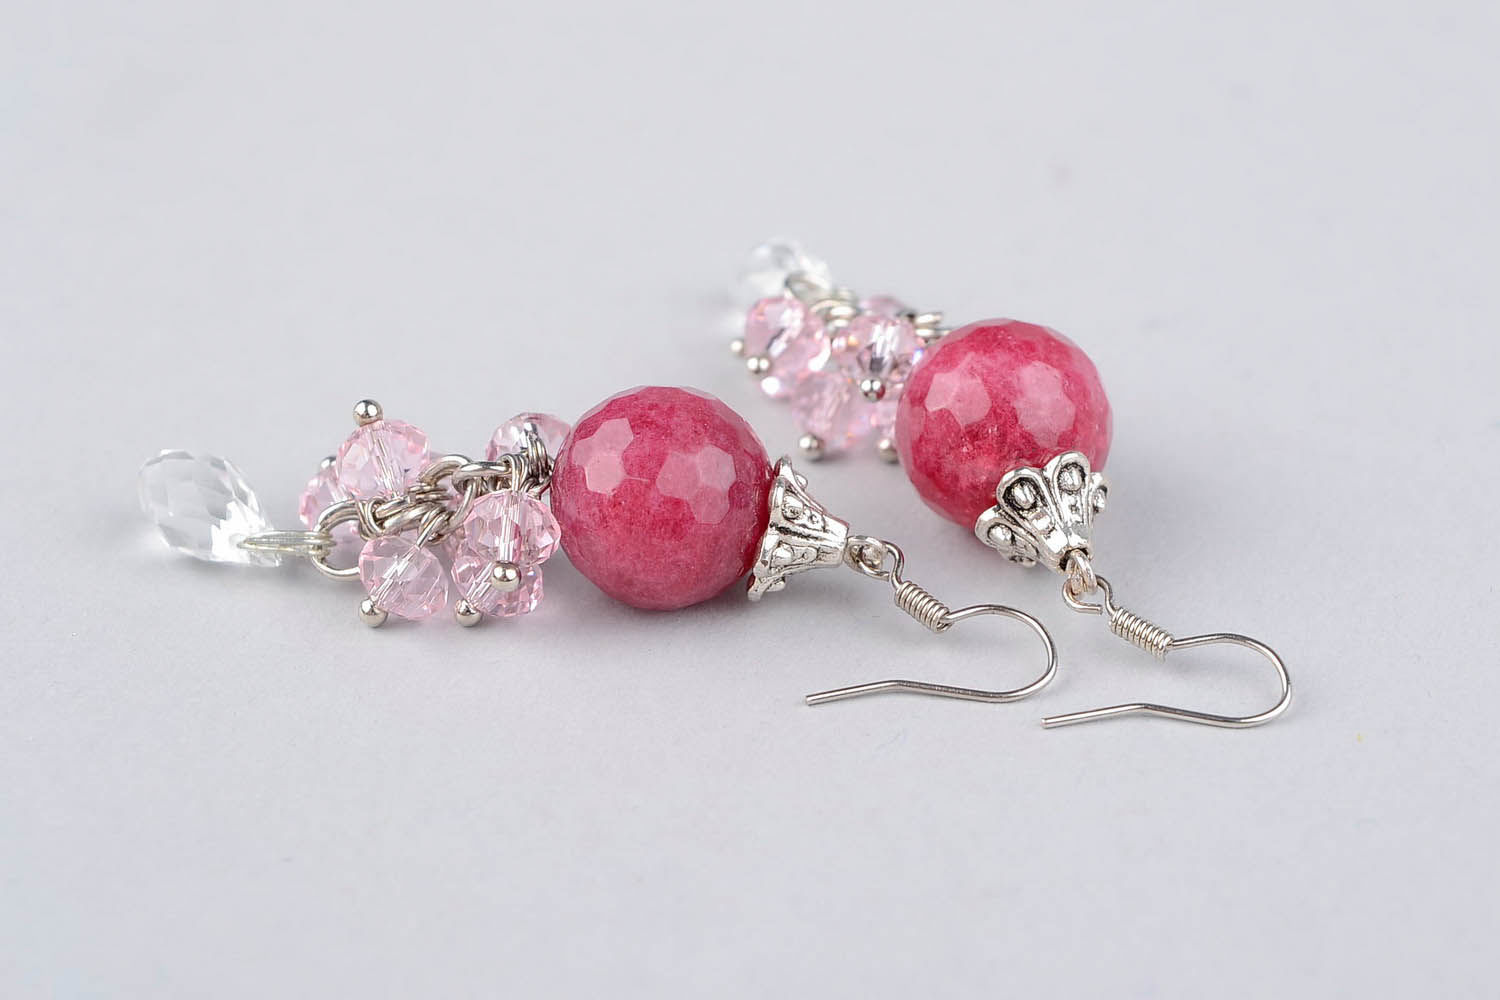 Earrings Cranberry in the Ice photo 2